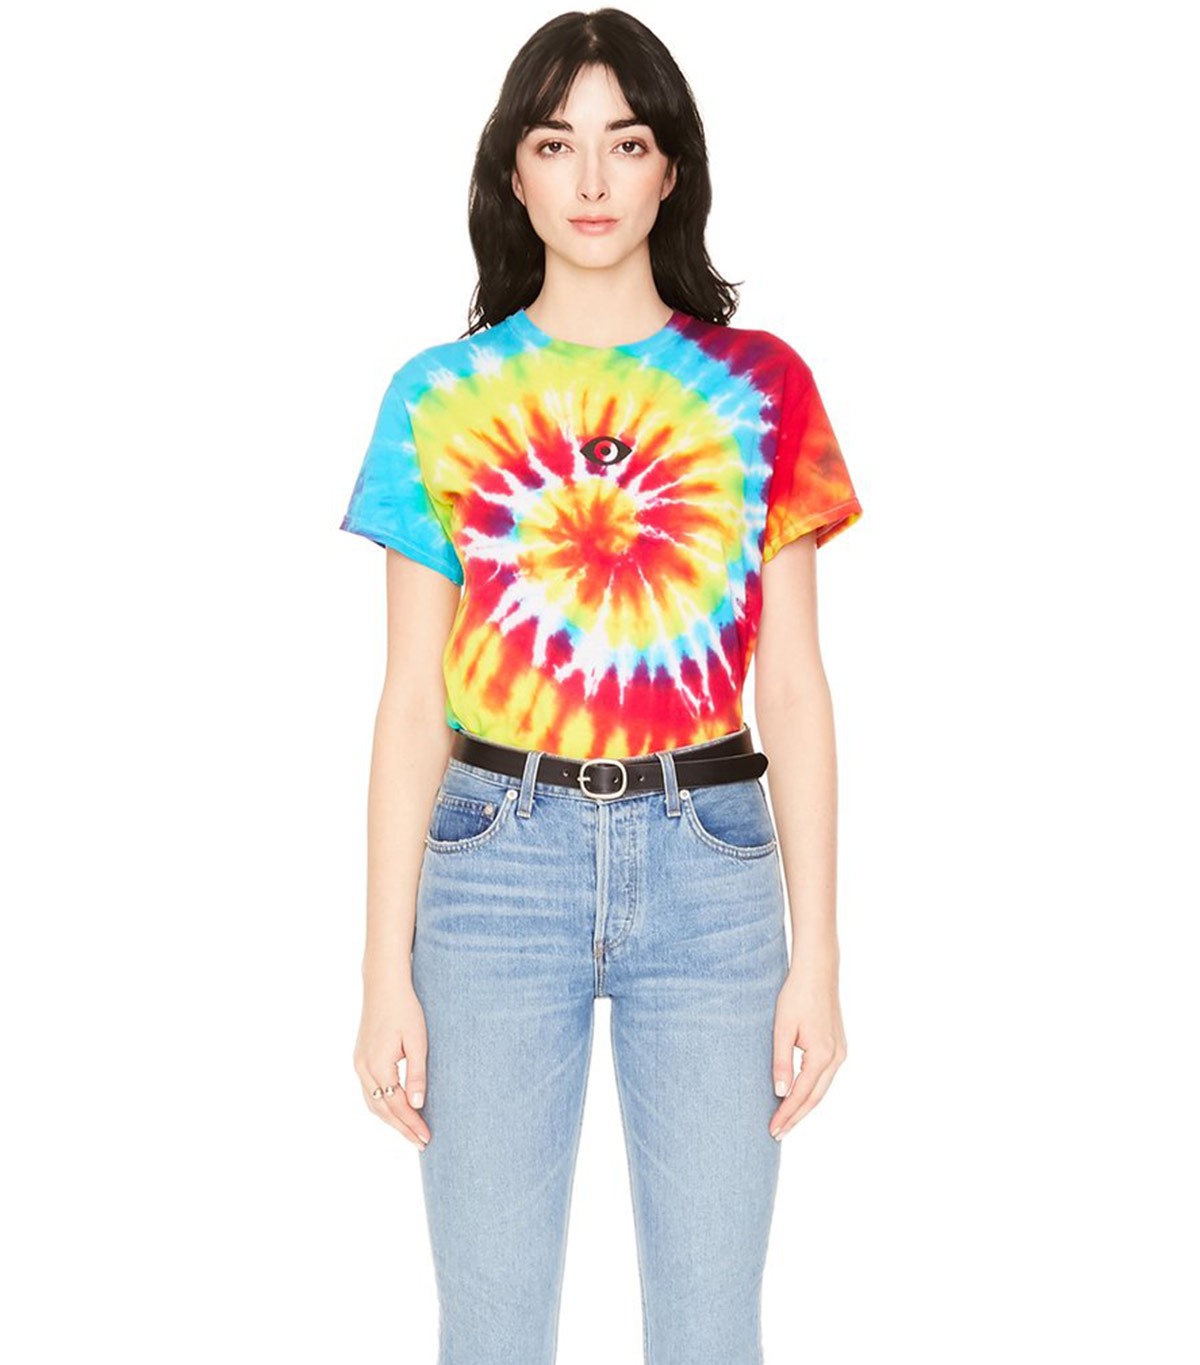 70s tie dye shirt The thing I really dislike ( and it may be just me